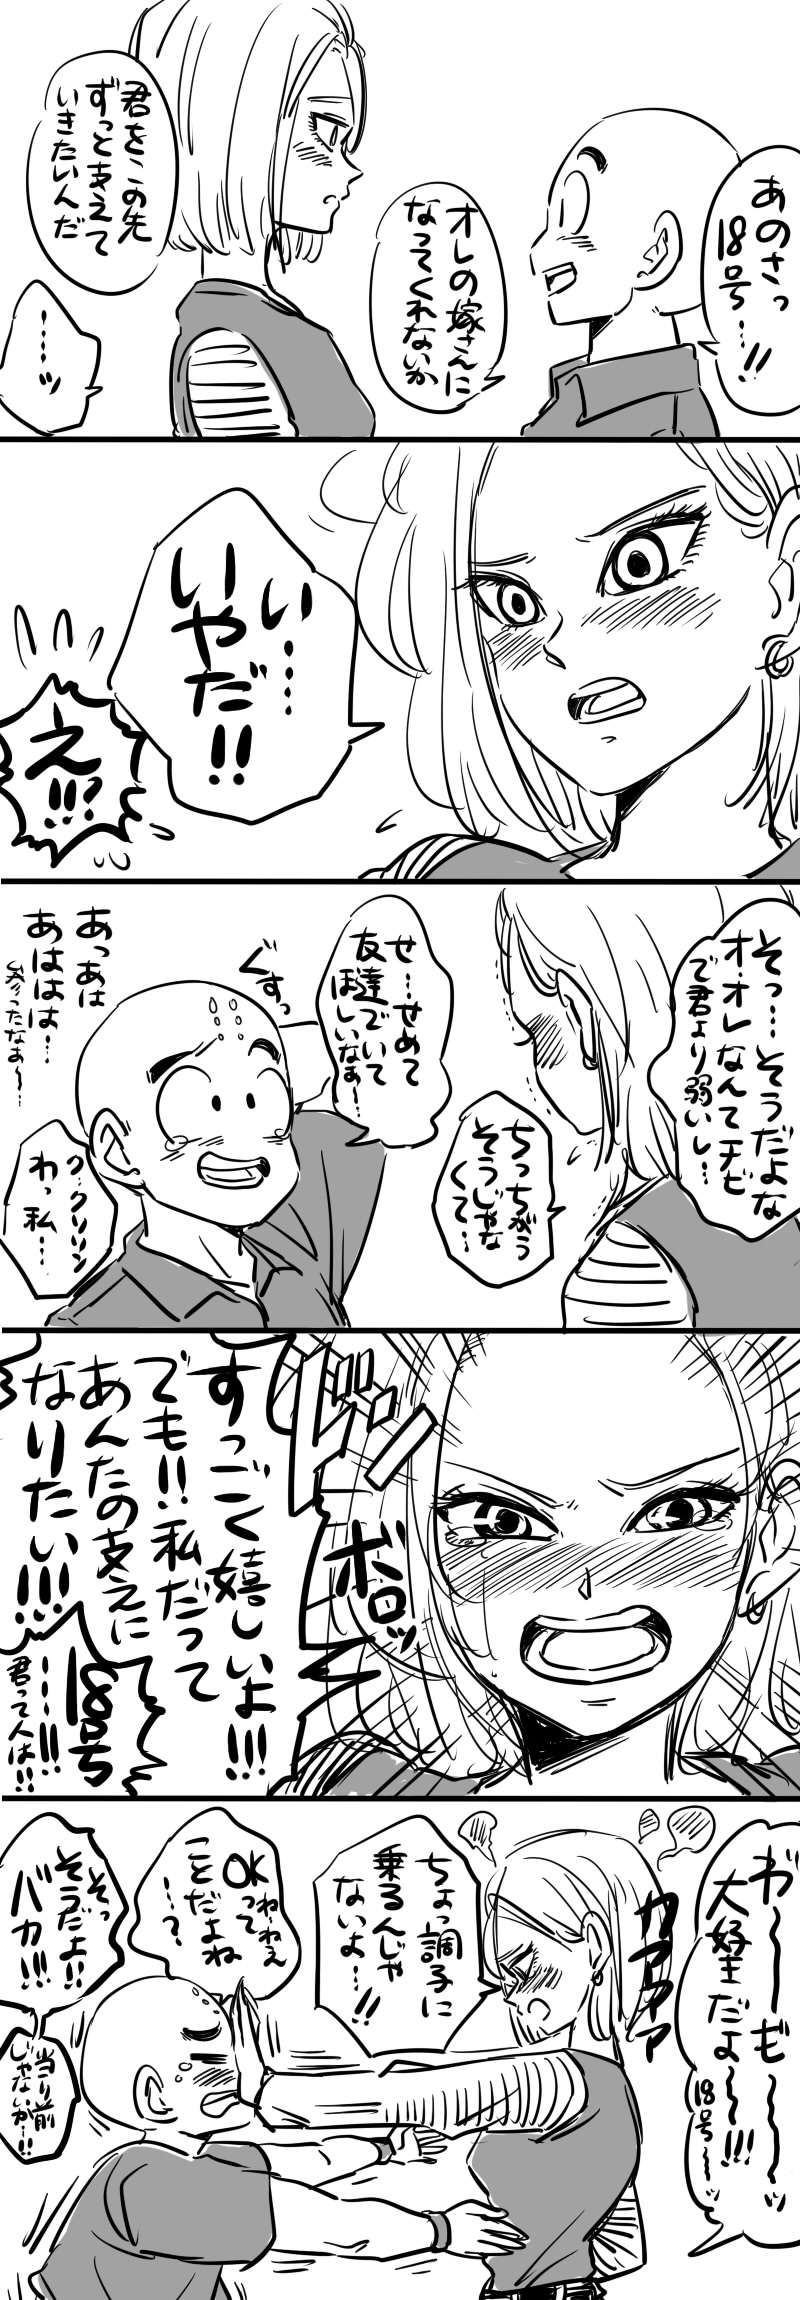 1boy 1girl 4koma android_18 bald blush clenched_teeth closed_eyes collared_shirt comic dragon_ball dragon_ball_z earrings emphasis_lines facial_mark flying_sweatdrops forehead_mark hand_behind_head highres husband_and_wife jewelry kuririn miiko_(drops7) monochrome open_mouth pushing_away shirt tears teeth translation_request trembling